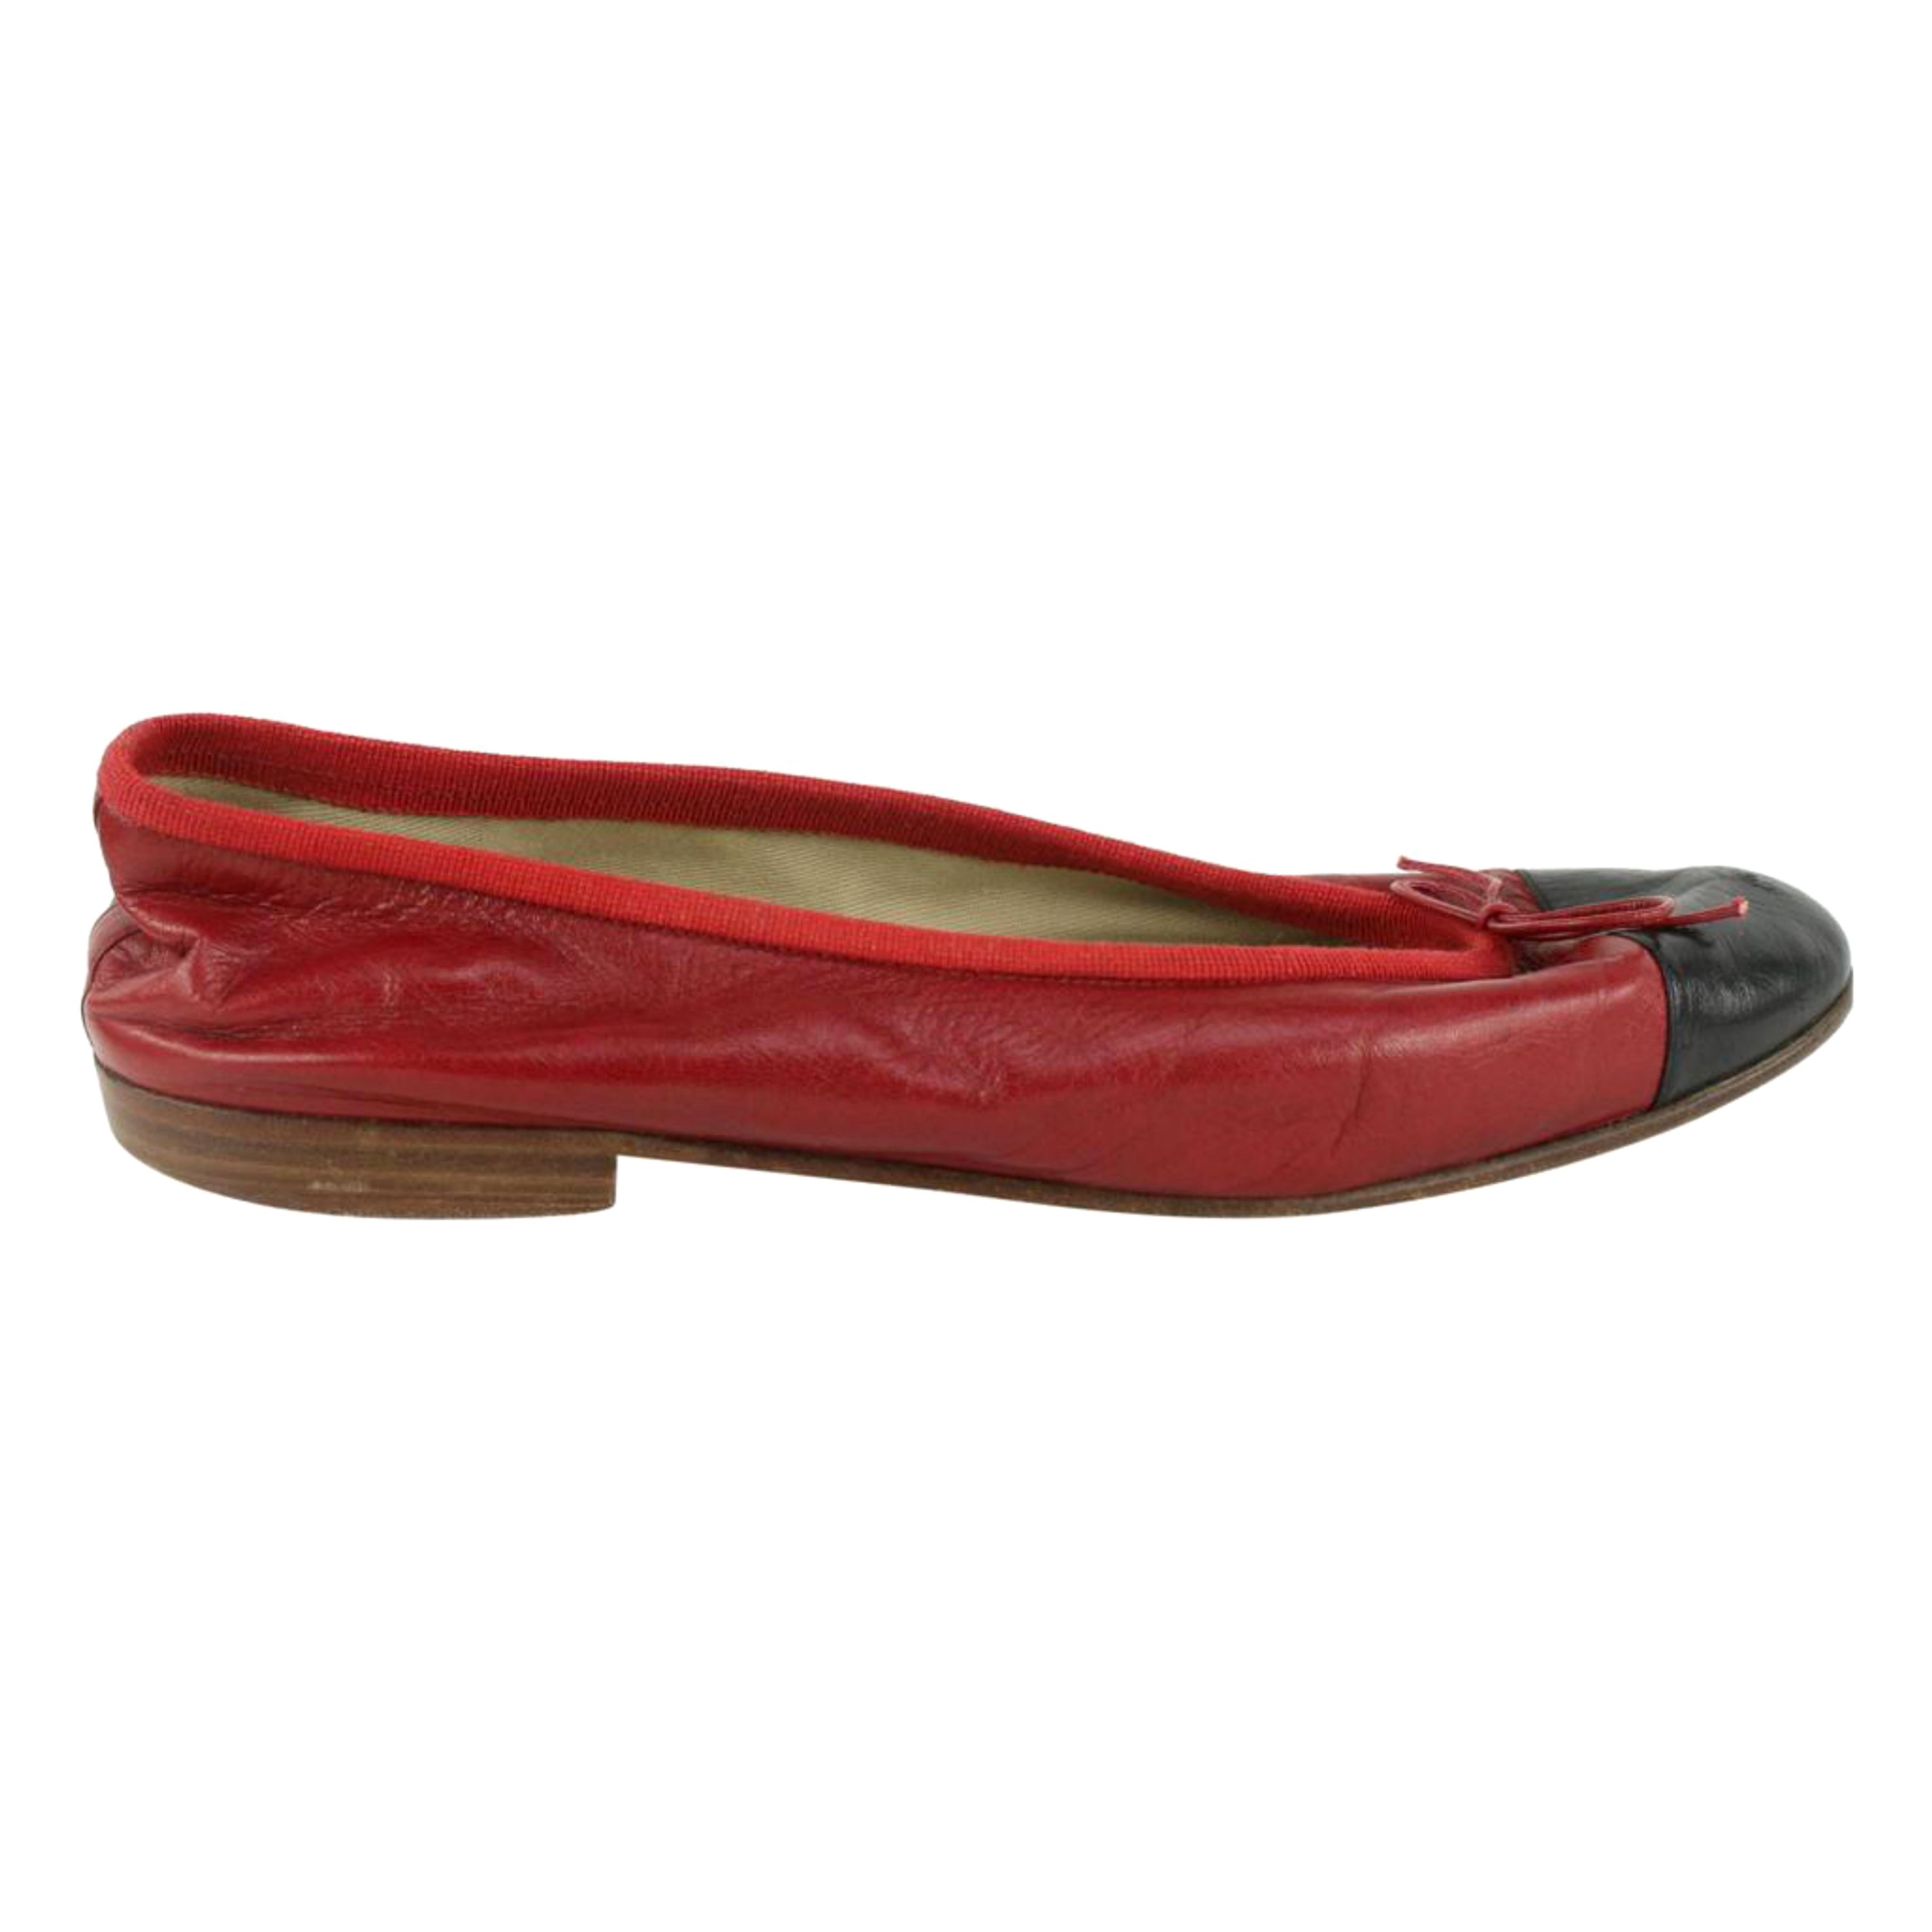 chanel ballet flats On Sale - Authenticated Resale